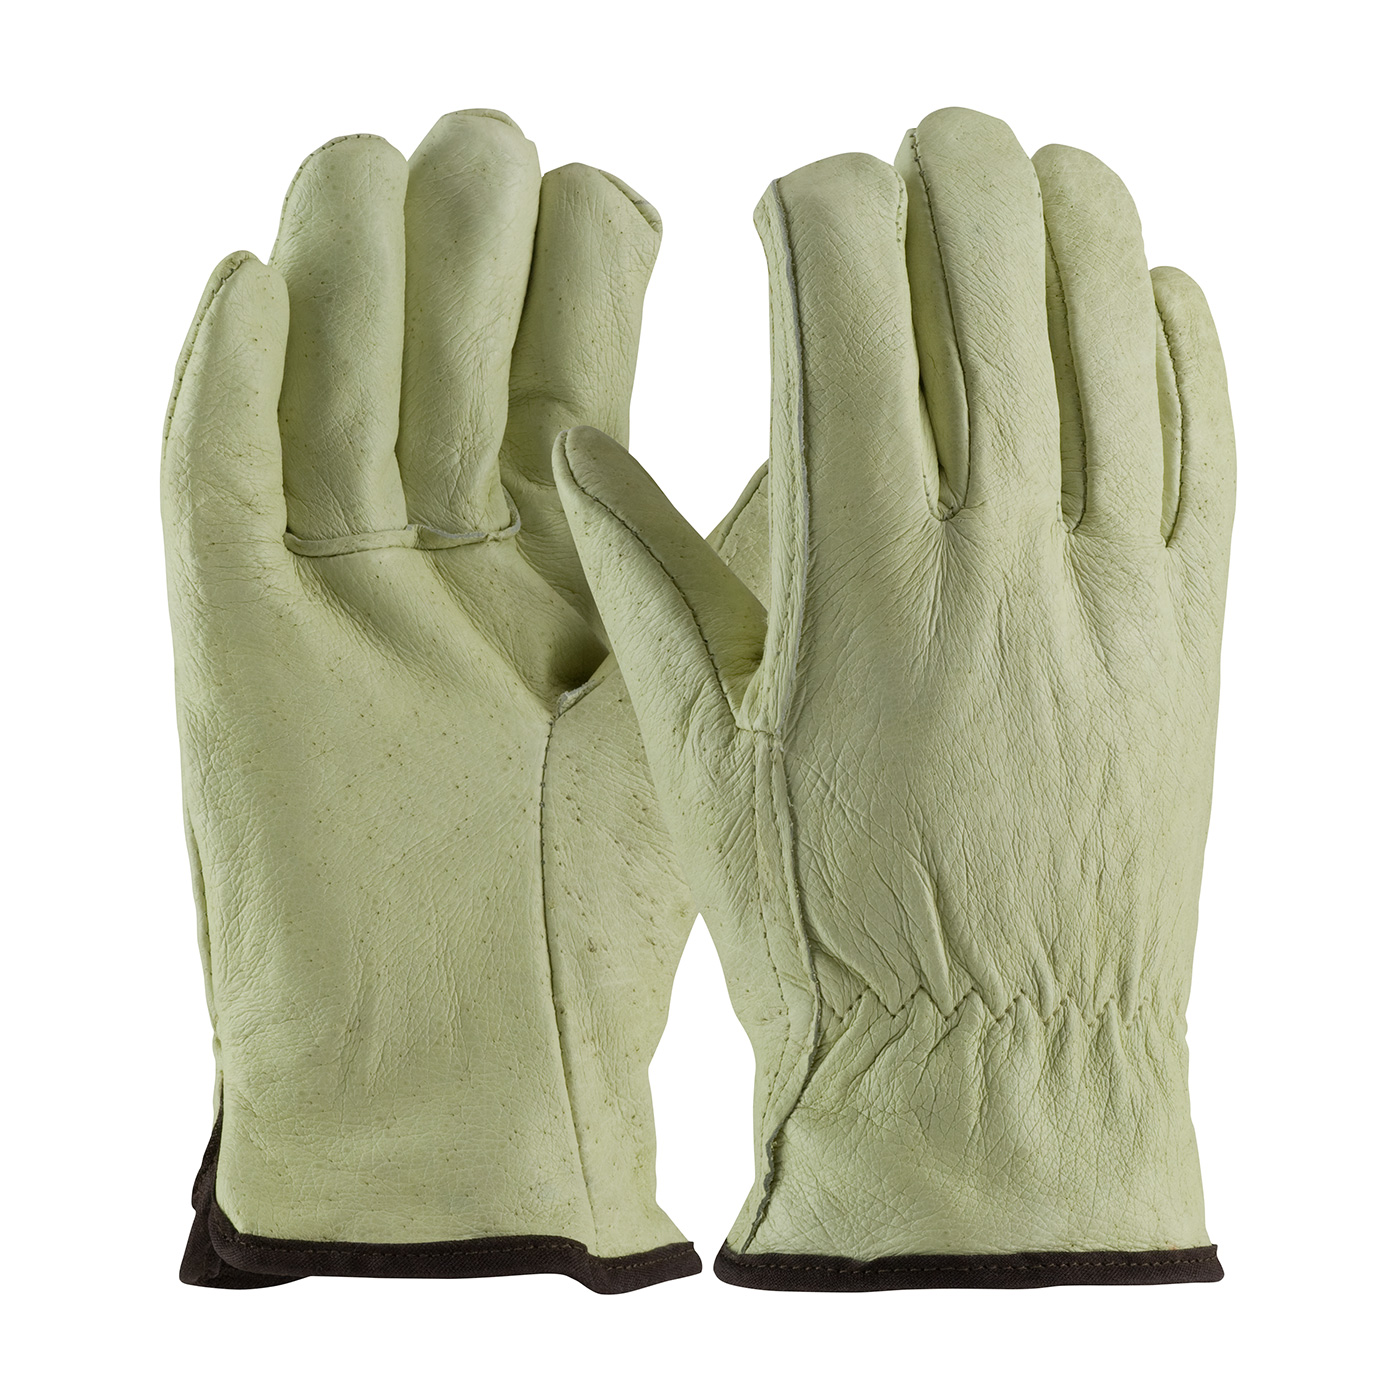 PIP Top Grain Pigskin Leather Glove with Thermal Lining from Columbia Safety